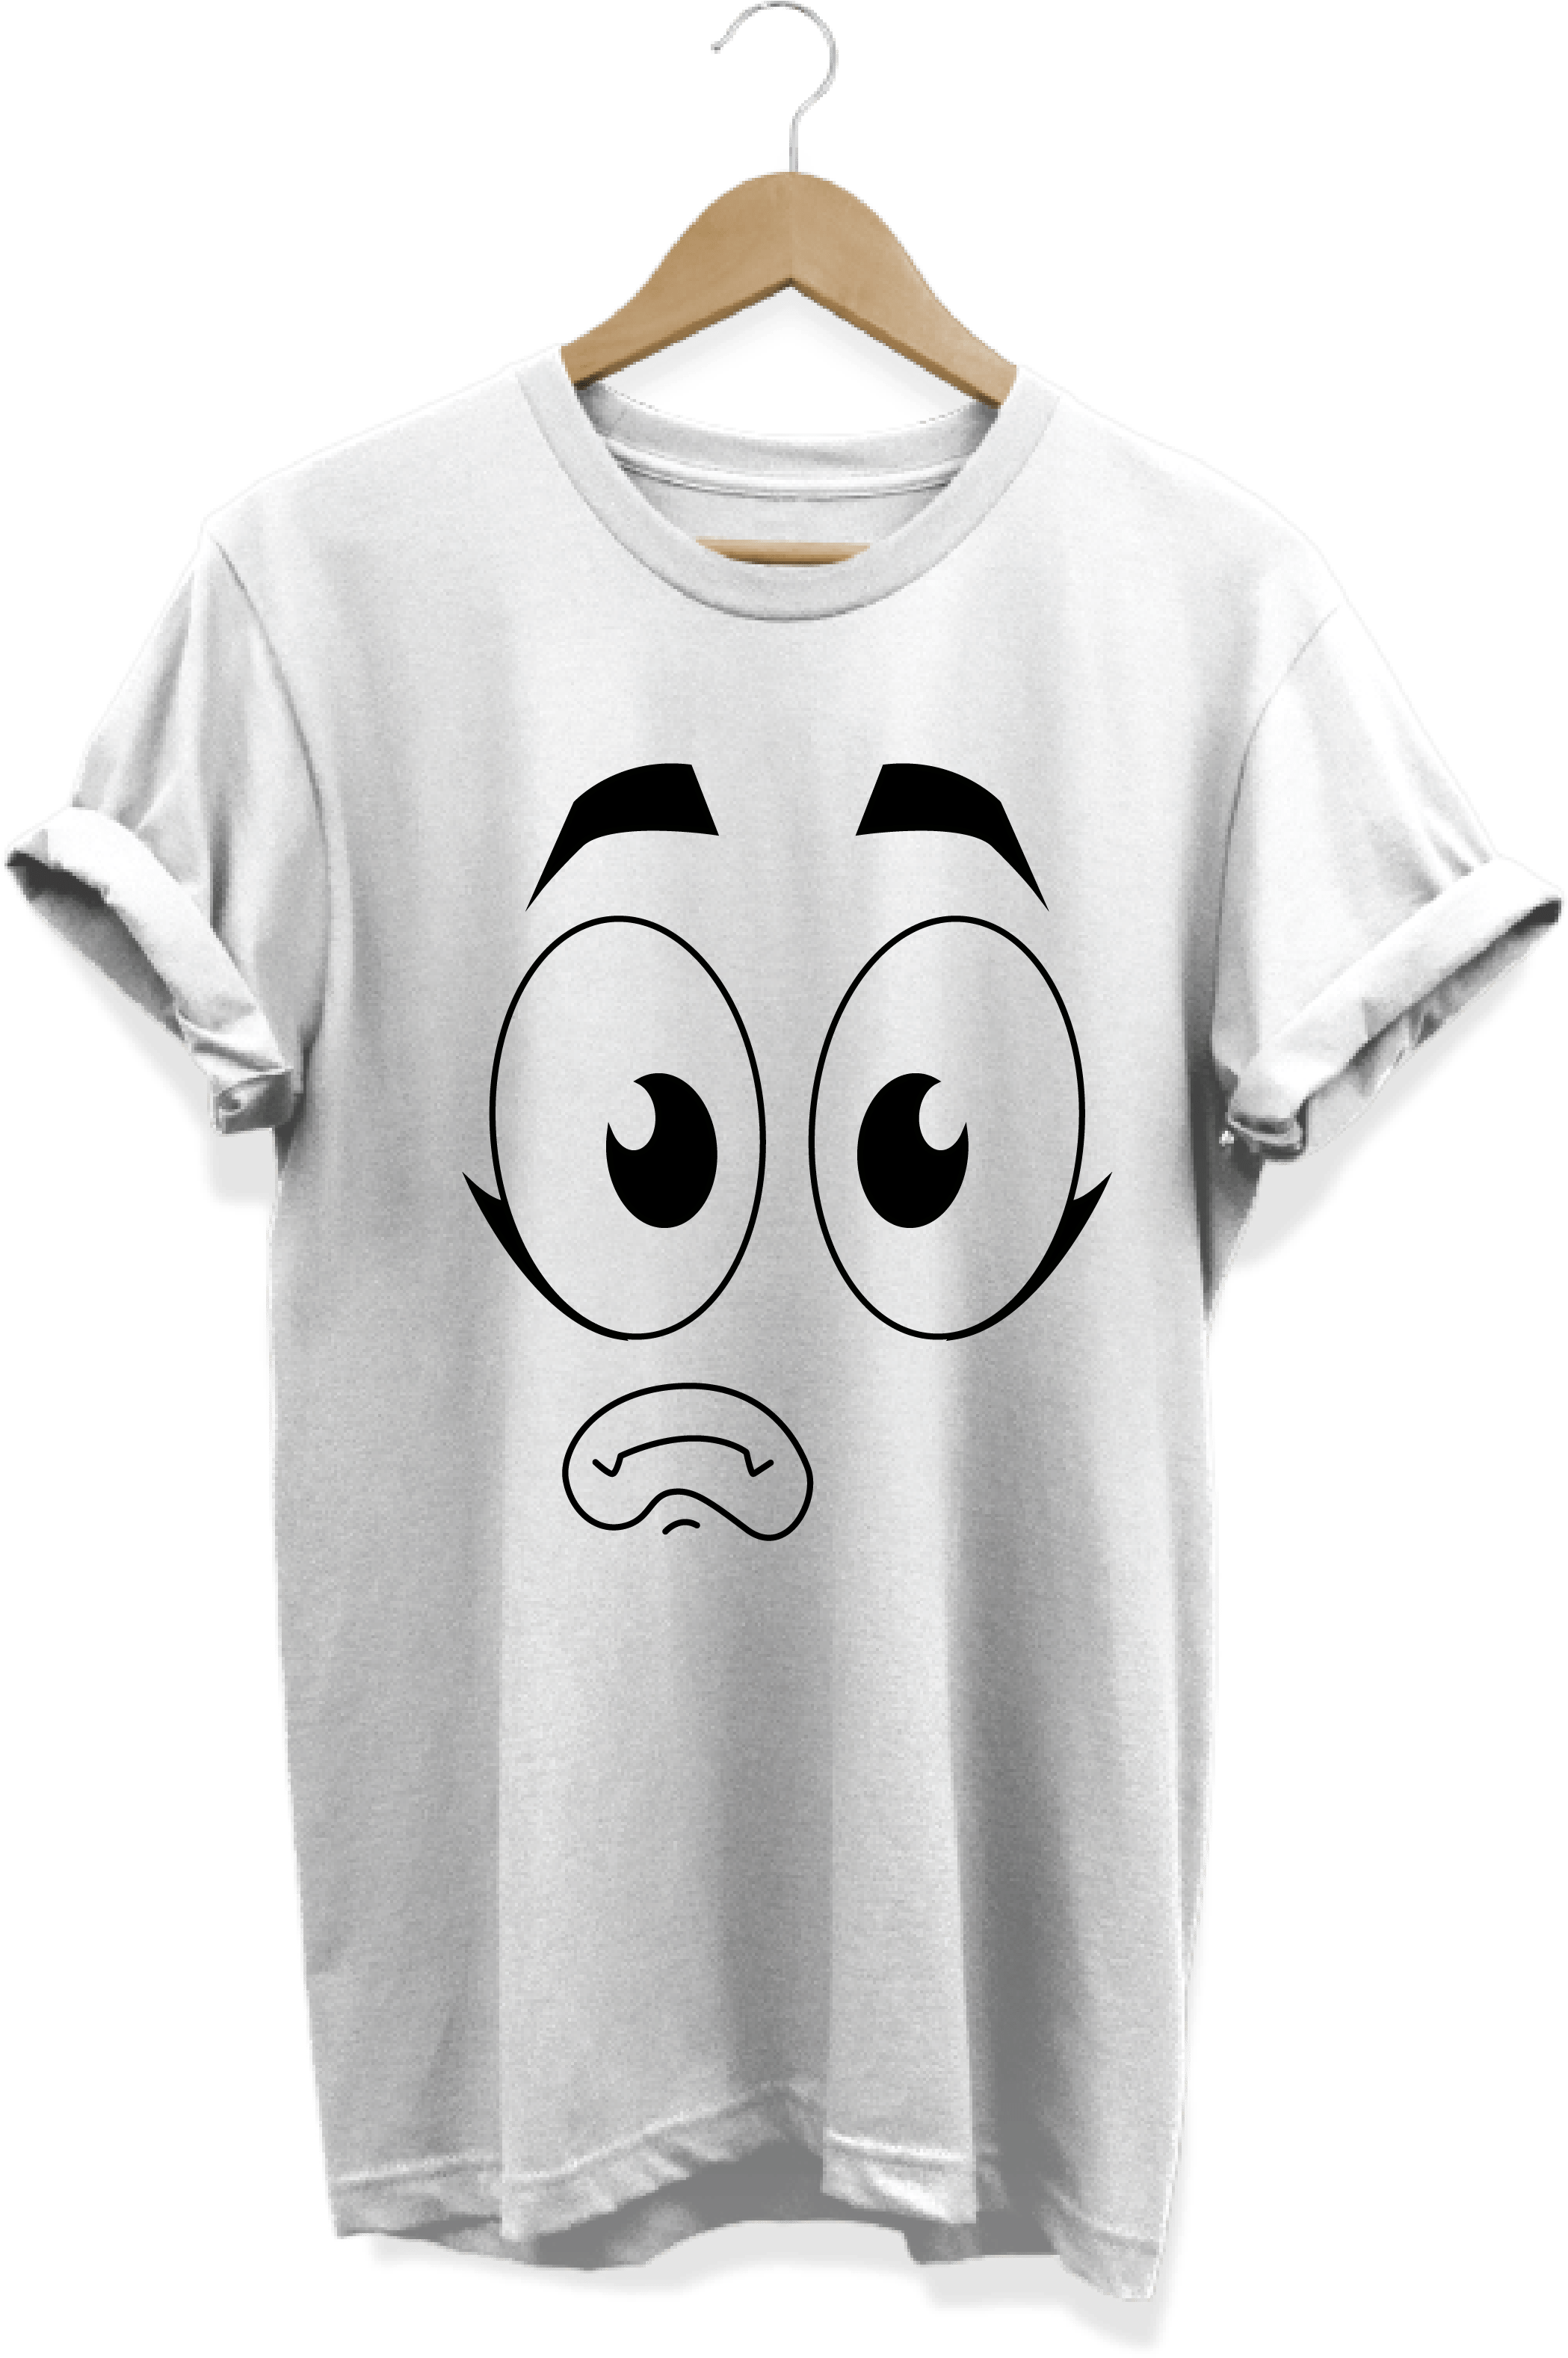 A White Shirt With A Face On It